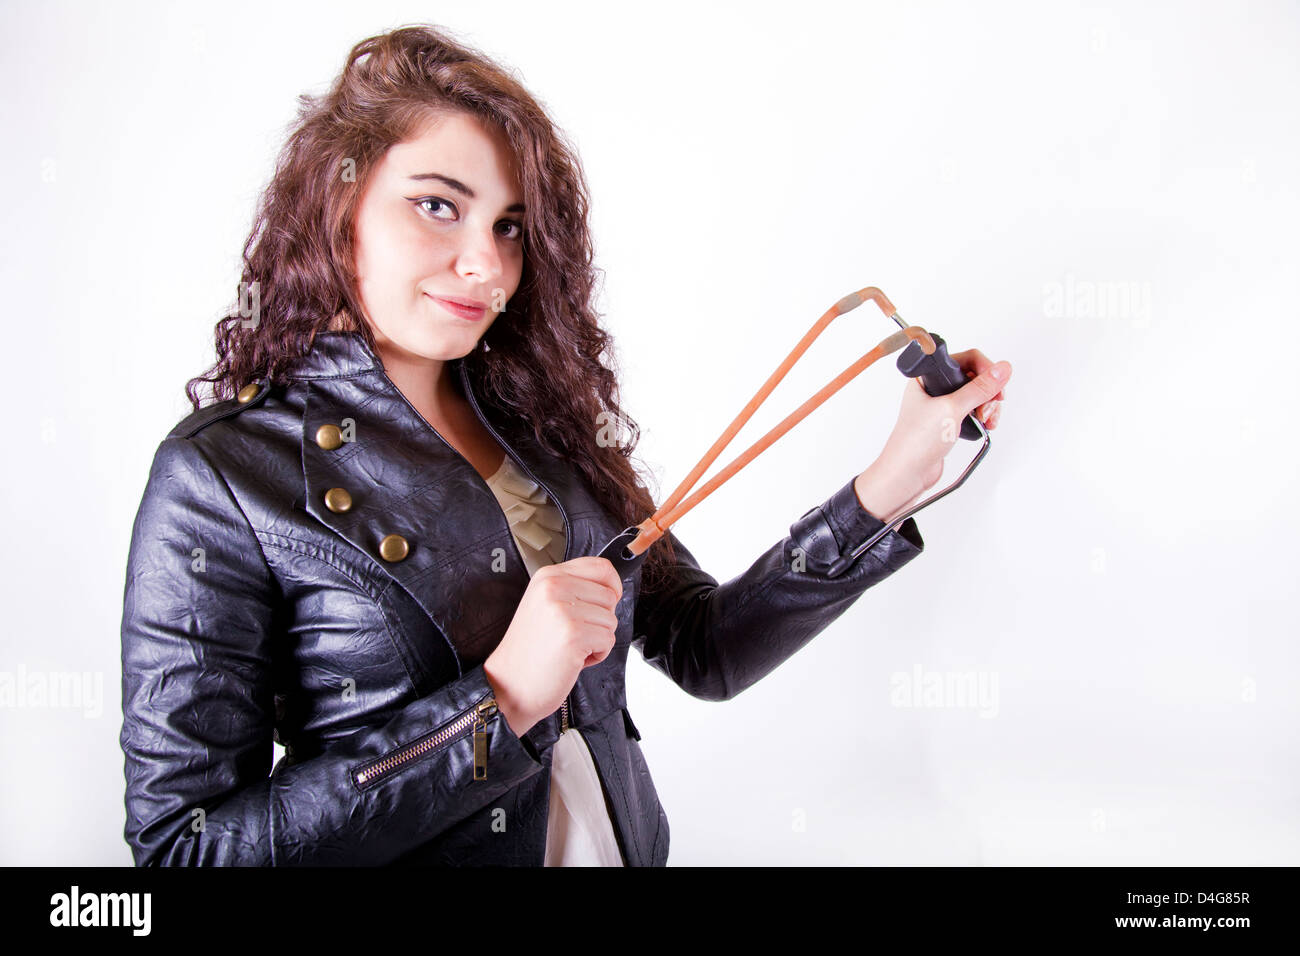 brunette young girl holding a slingshot aiming at the camera smiling Stock Photo